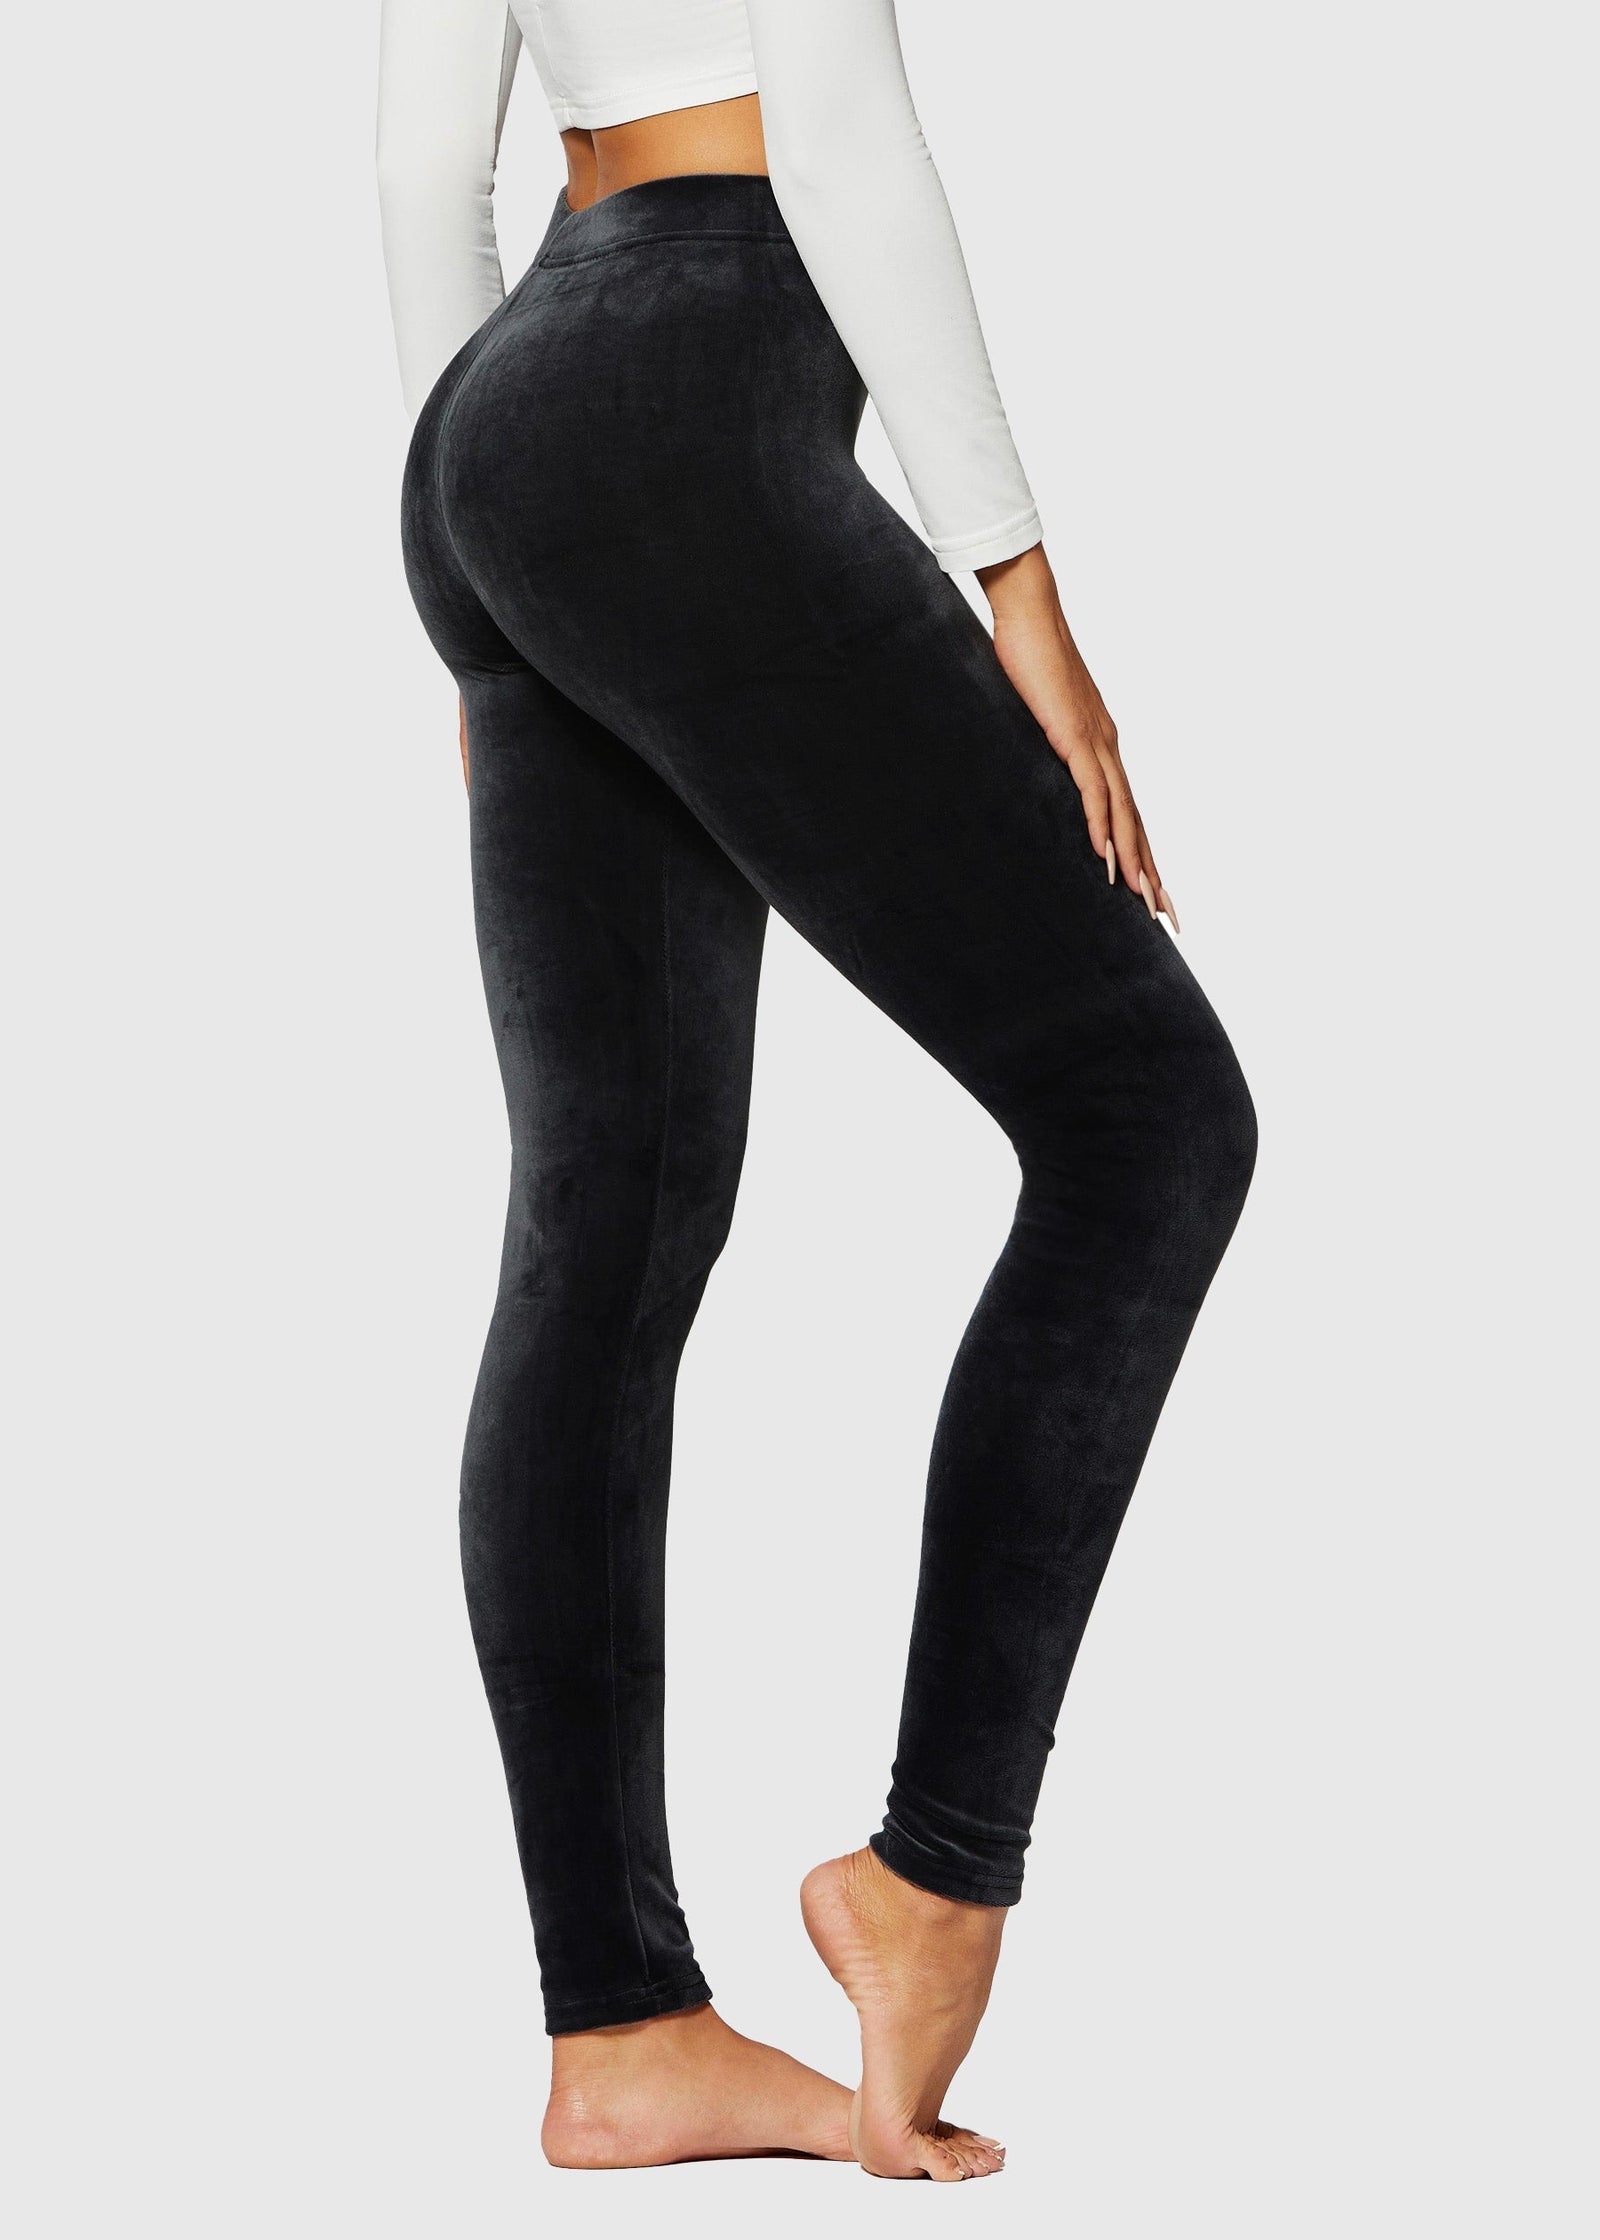 CURVED, COMFY & CONFIDENT. 🖤 These basic leggings give you all